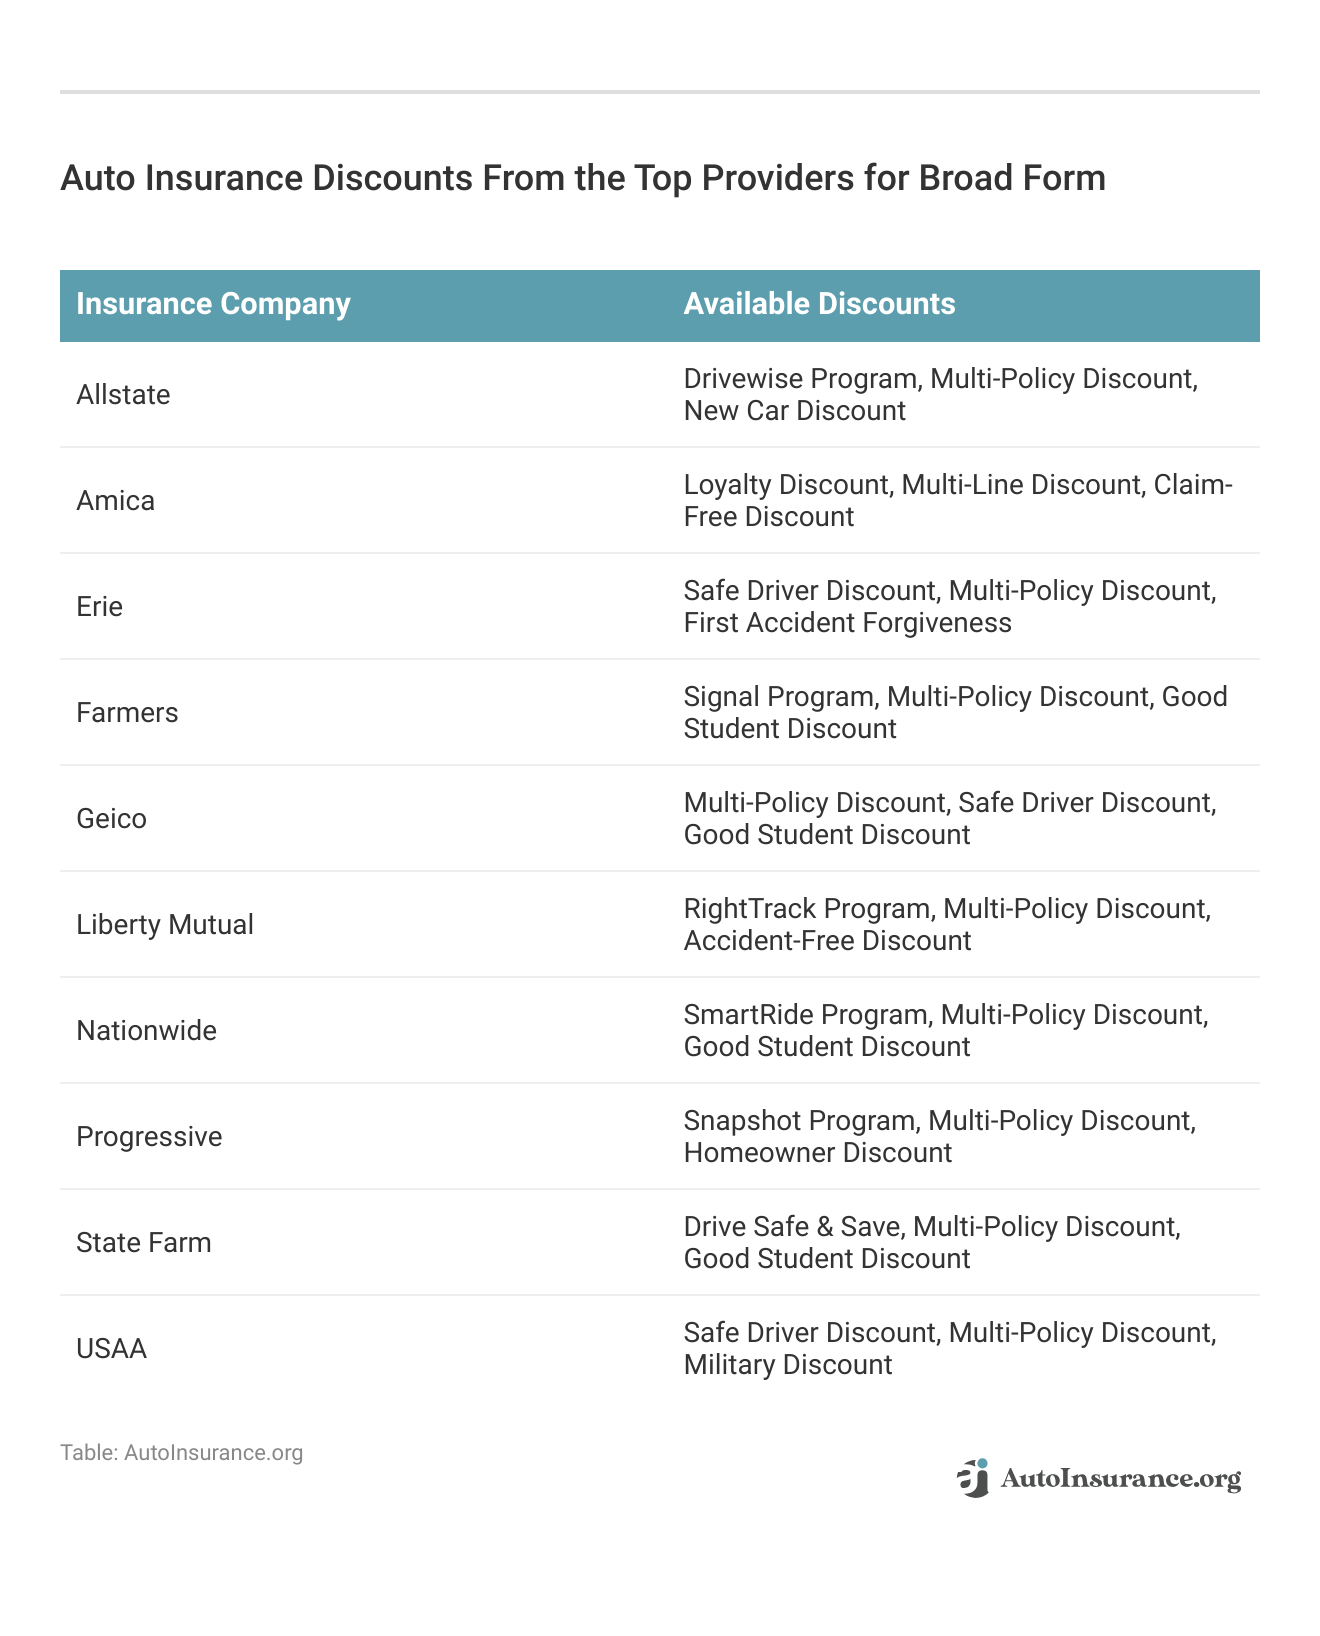 <h3>Auto Insurance Discounts From the Top Providers for Broad Form</h3>